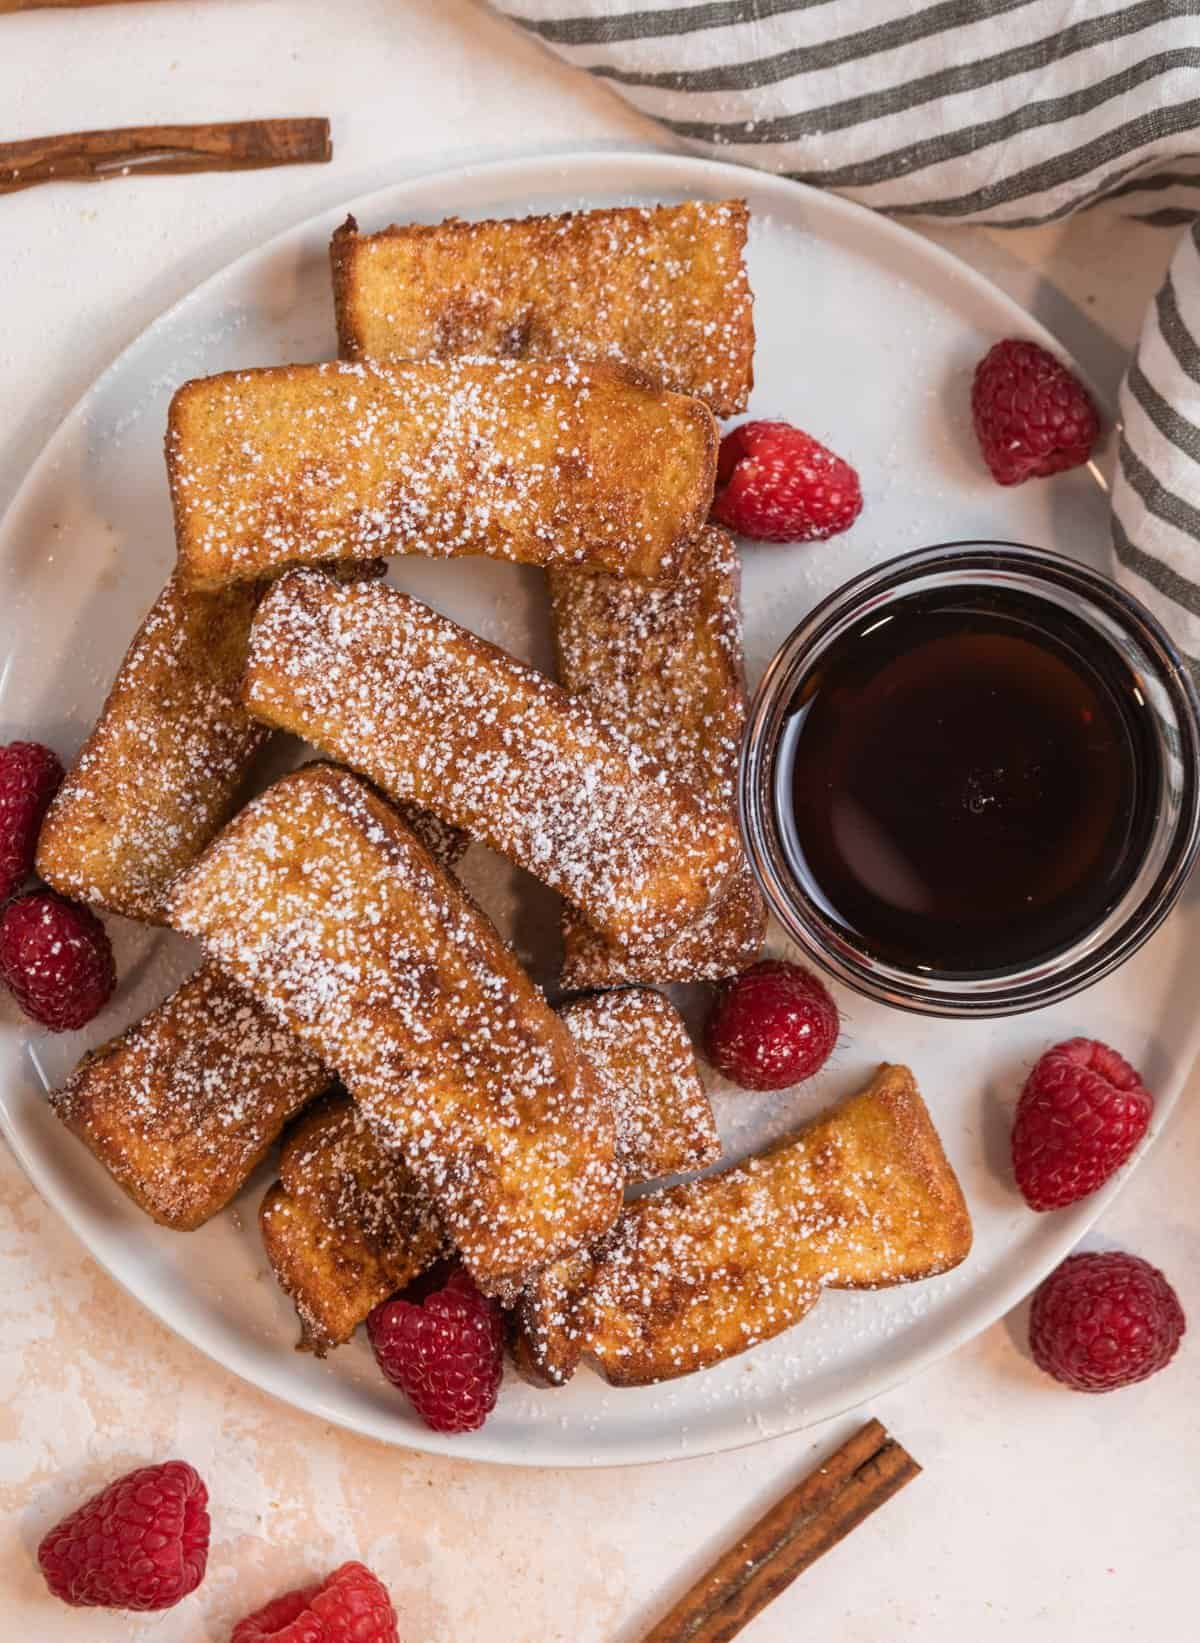 Overhead view of plate of cinnamon sugar covered air fryer French toast sticks with maple syrup in glass bowl.